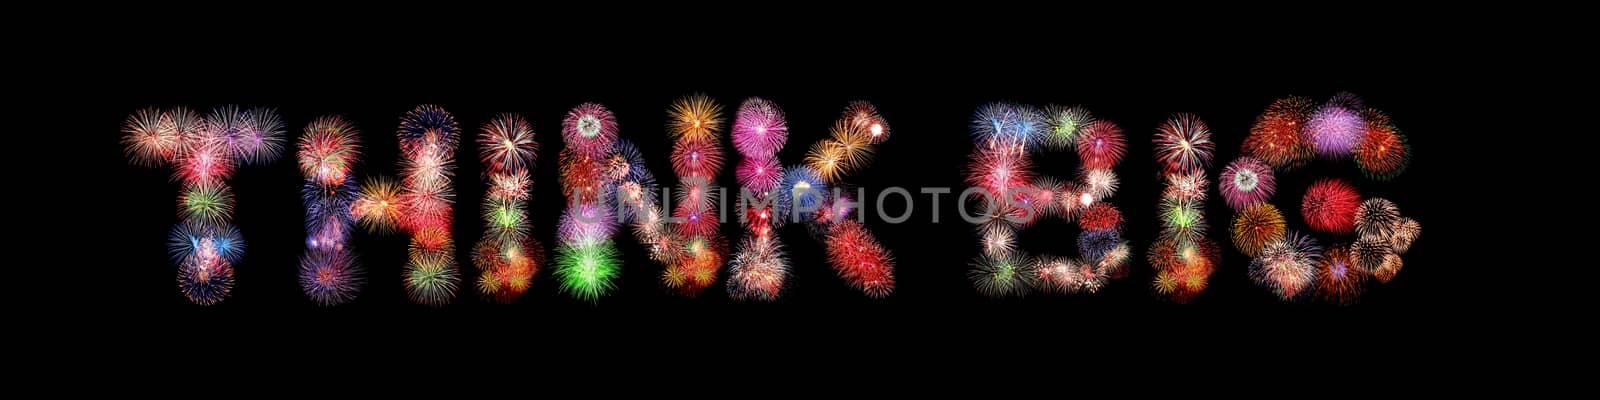 Think big word colorful fireworks text isolated on black background